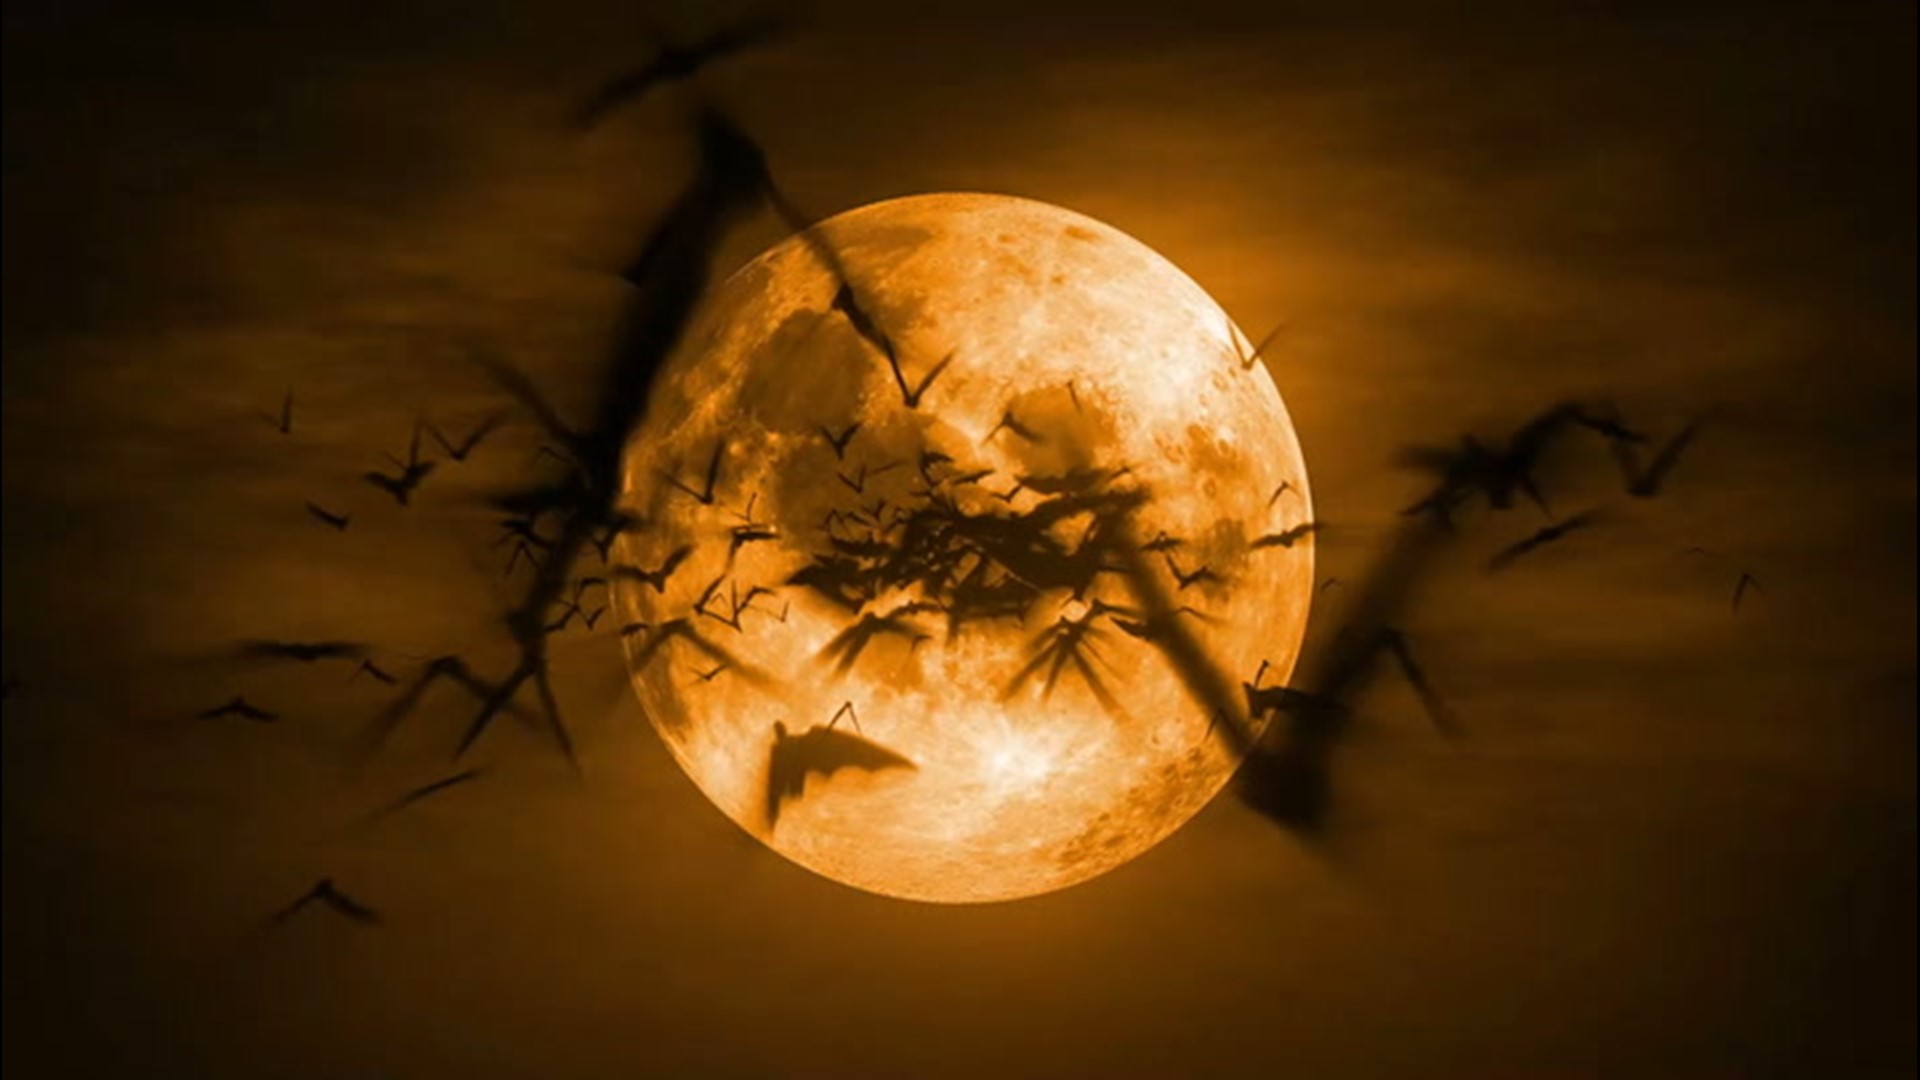 Rare full moon to make this Halloween extra spooky